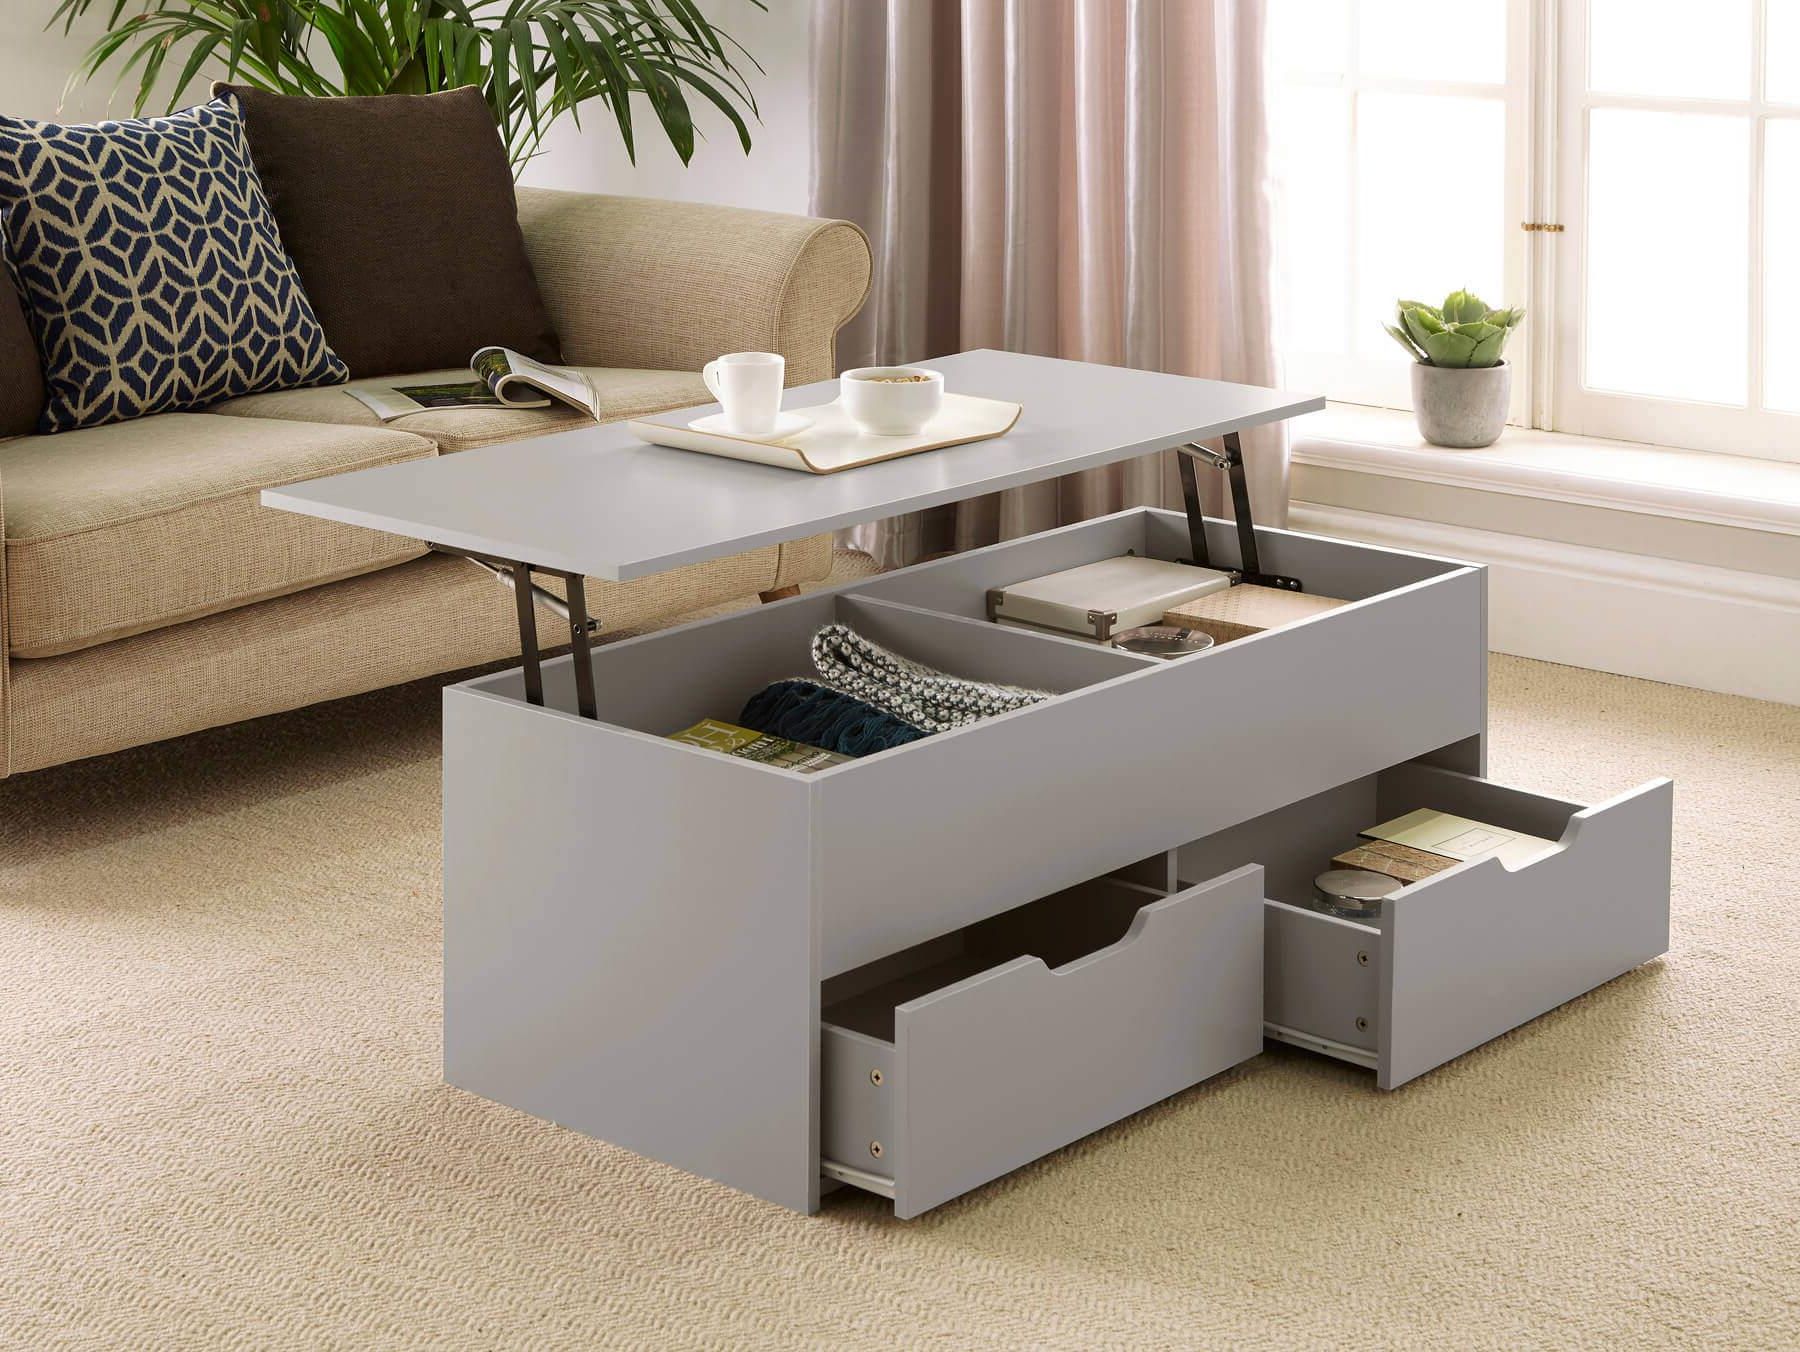 Grey Wooden Coffee Table With Lift Up Top And 2 Large Inside Latest Smoke Gray Wood Coffee Tables (View 6 of 20)